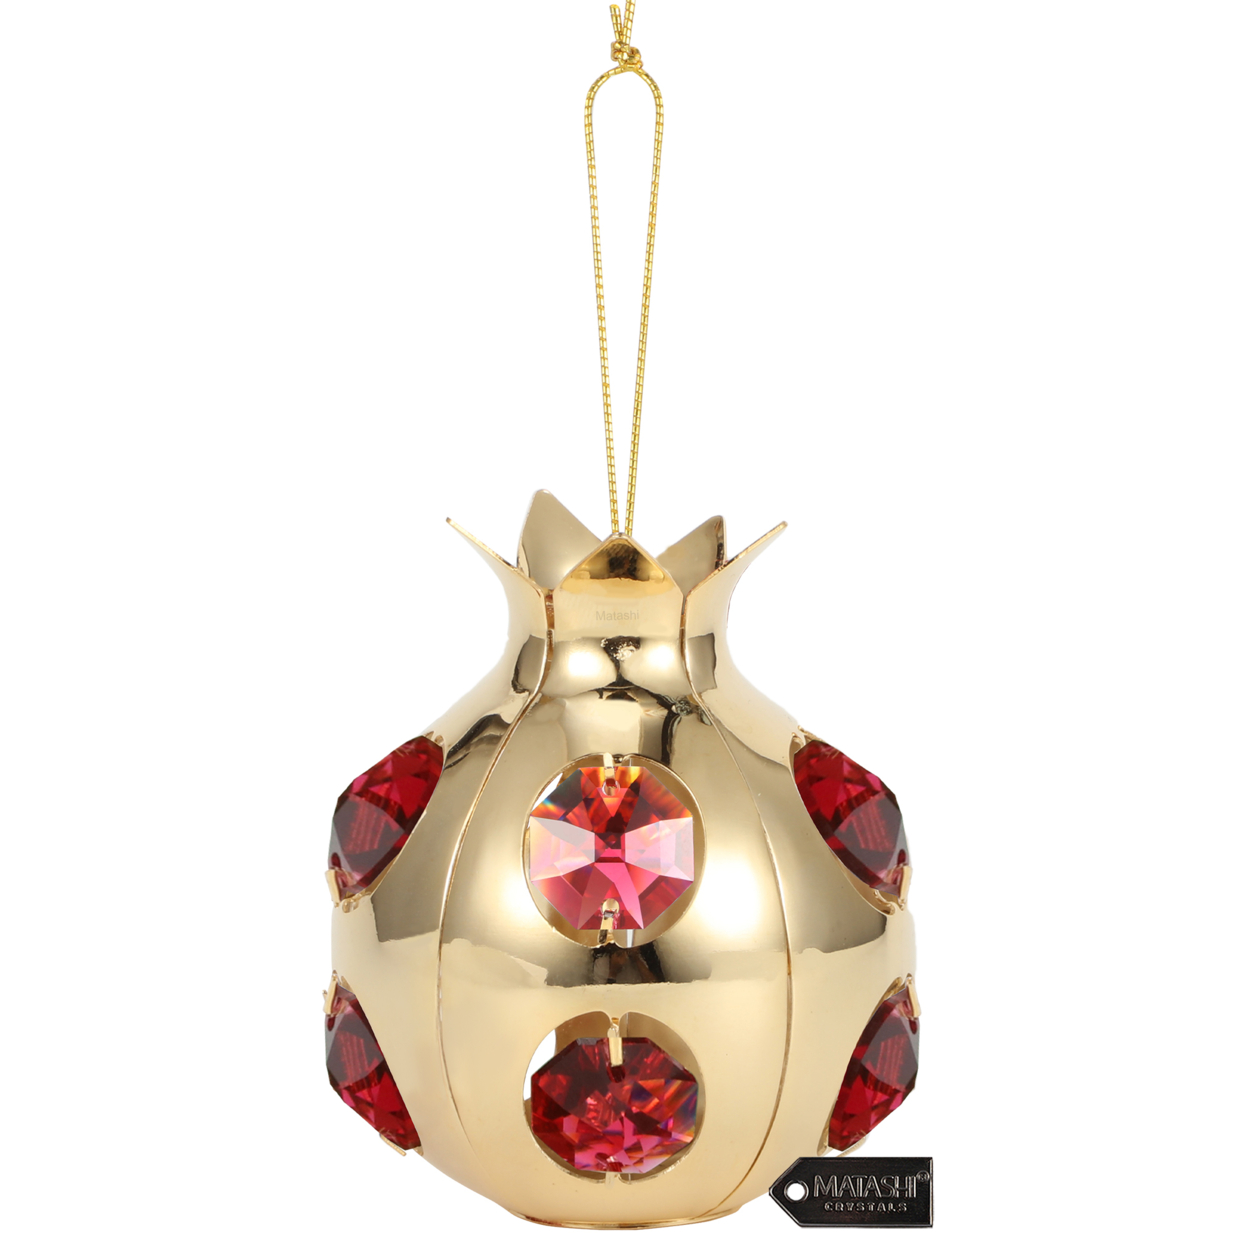 Matashi 24K Gold Plated Pomegranate Fruit Ornament W Red Crystals Perfect For Sukkot, Holidays, Christmas Ornament, Home Decor Gifts For Her